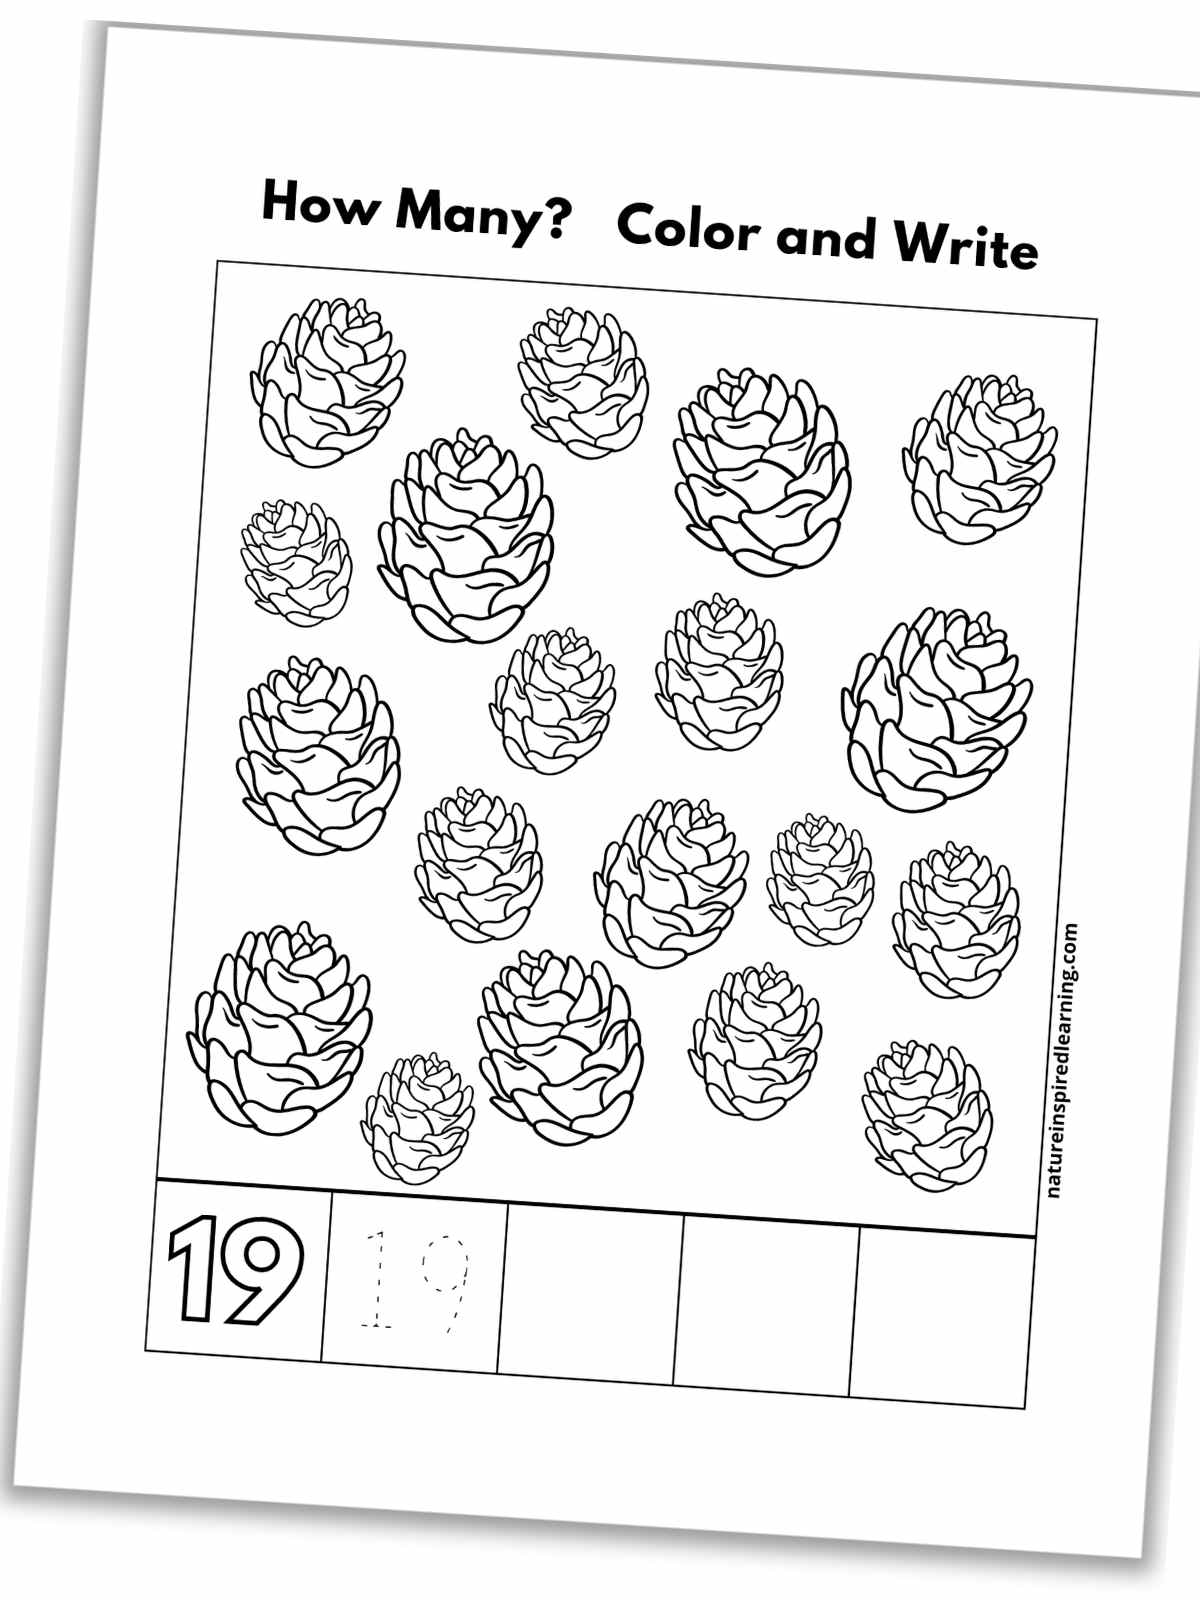 black and white number nineteen worksheet with pinecones, outline of number 19, a traceable 19, and blank boxes slanted with a drop shadow